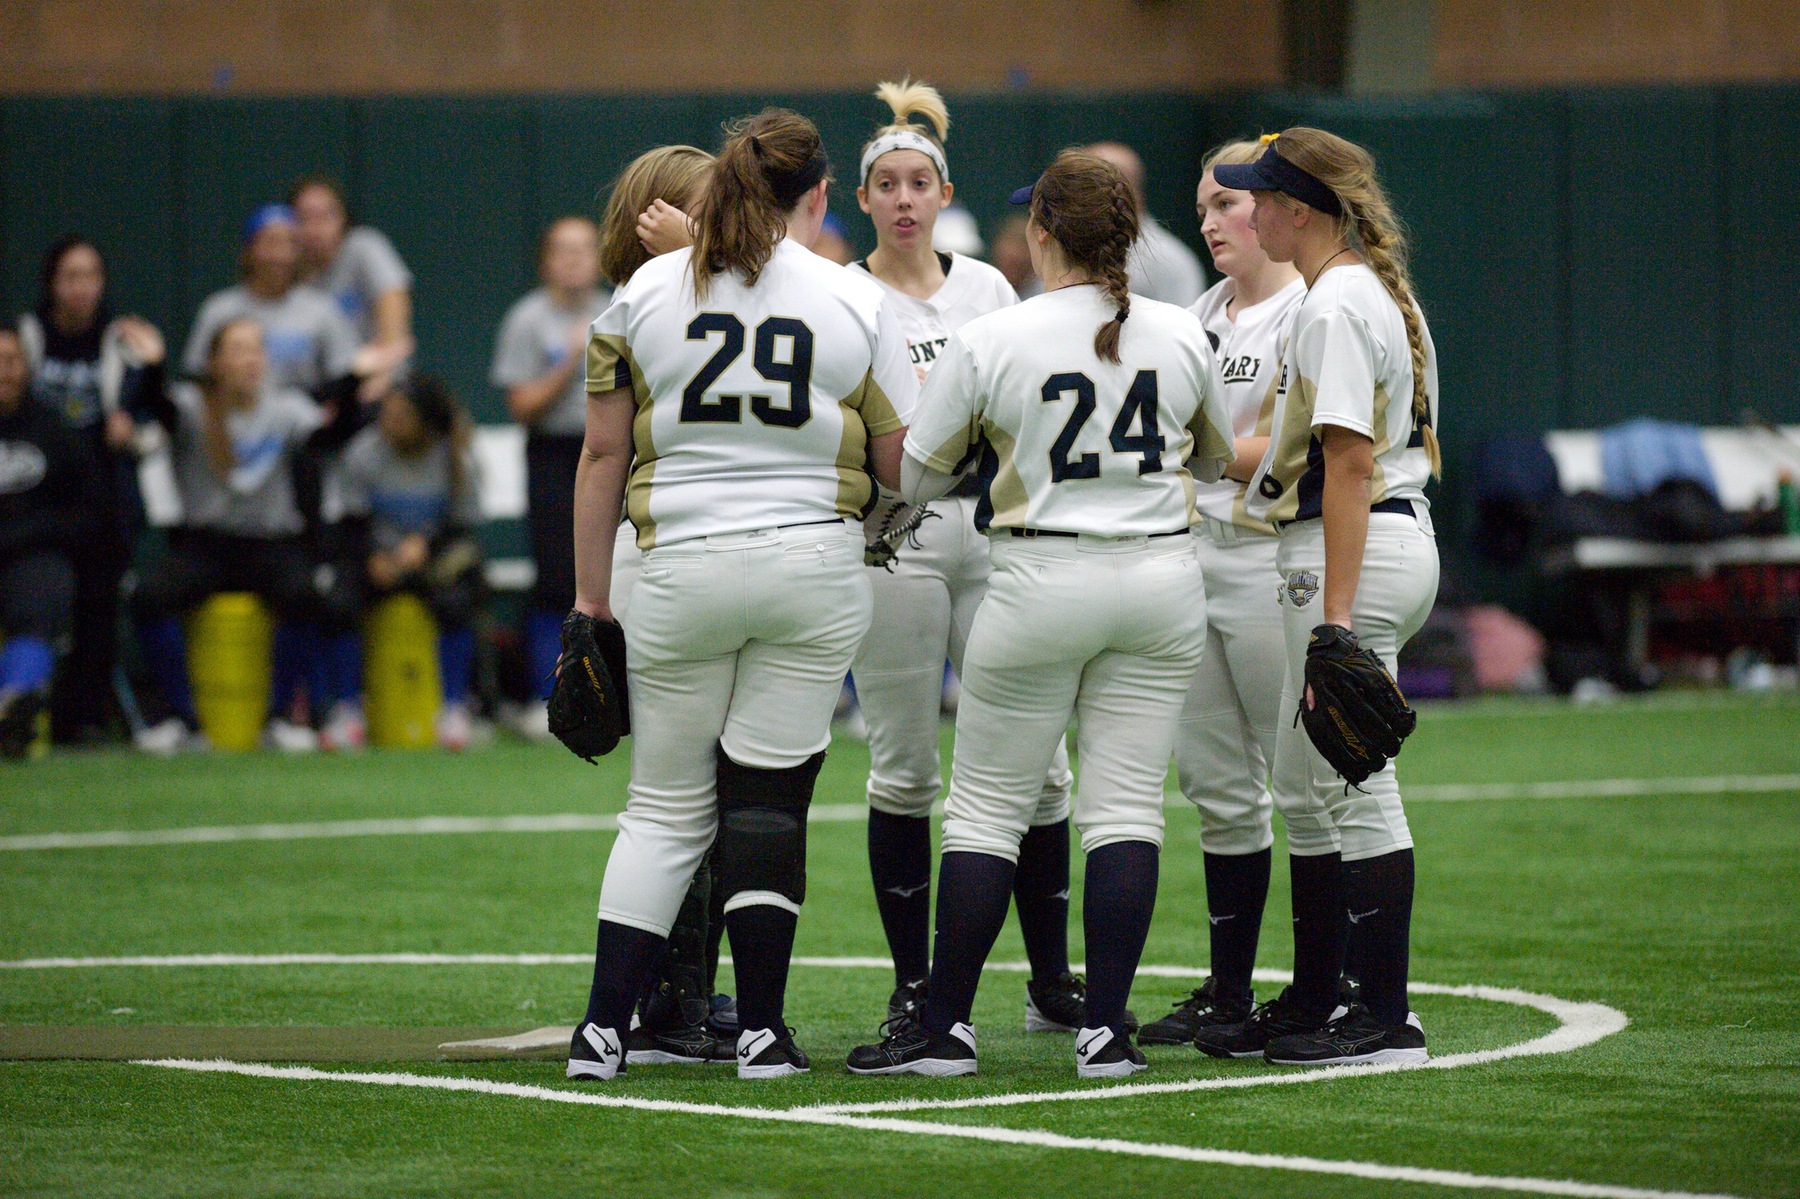 2020 Blue Angels Softball Preview